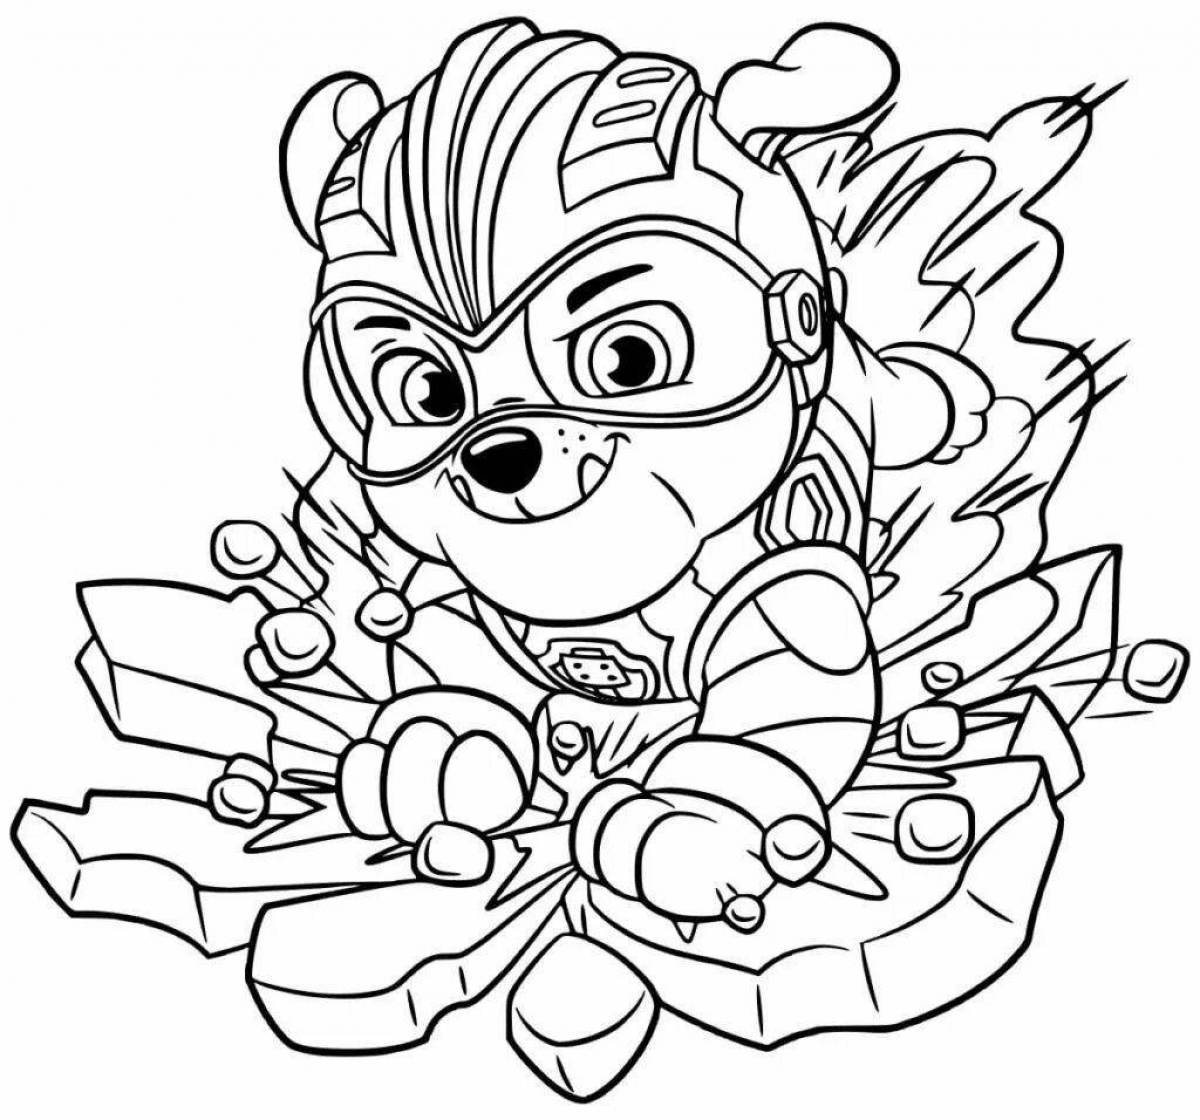 Awesome coloring pages paw patrol super puppies